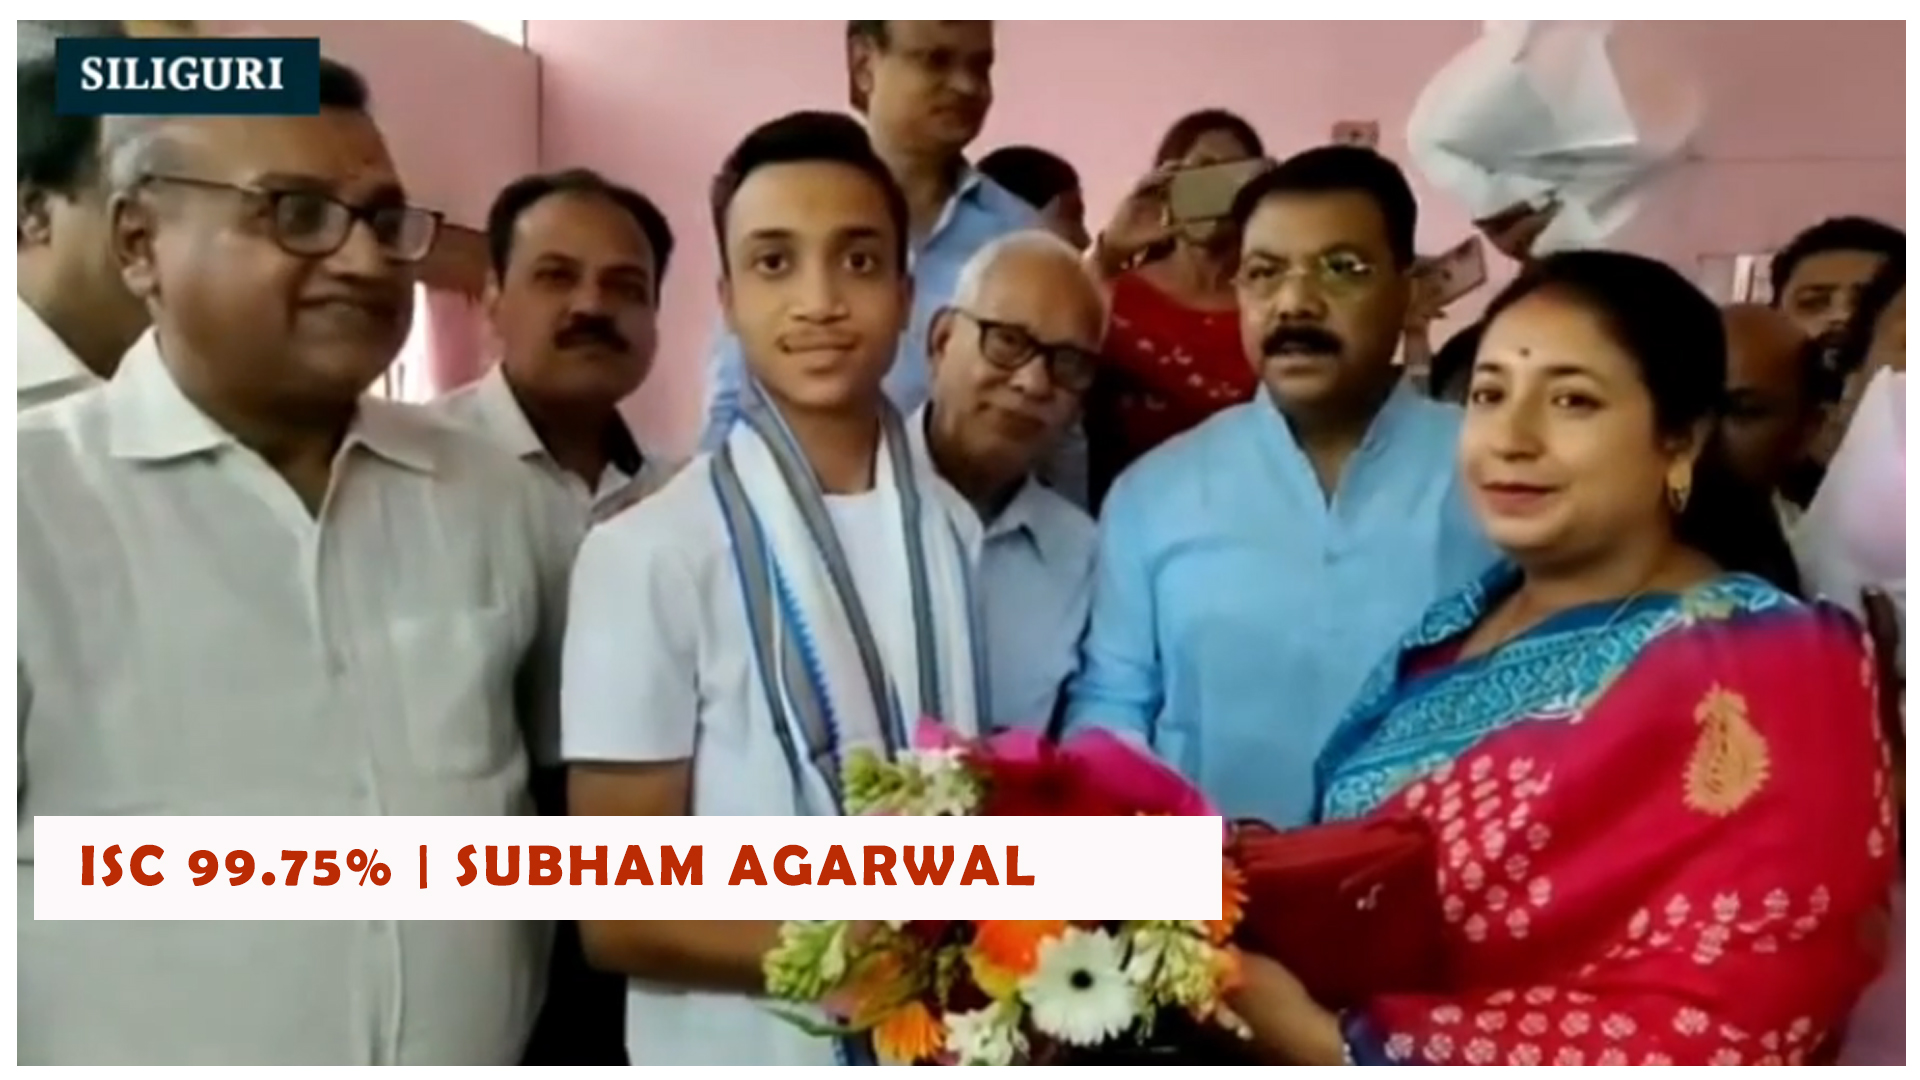 Many flocked to congratulate national topper Subham Kr Agarwal